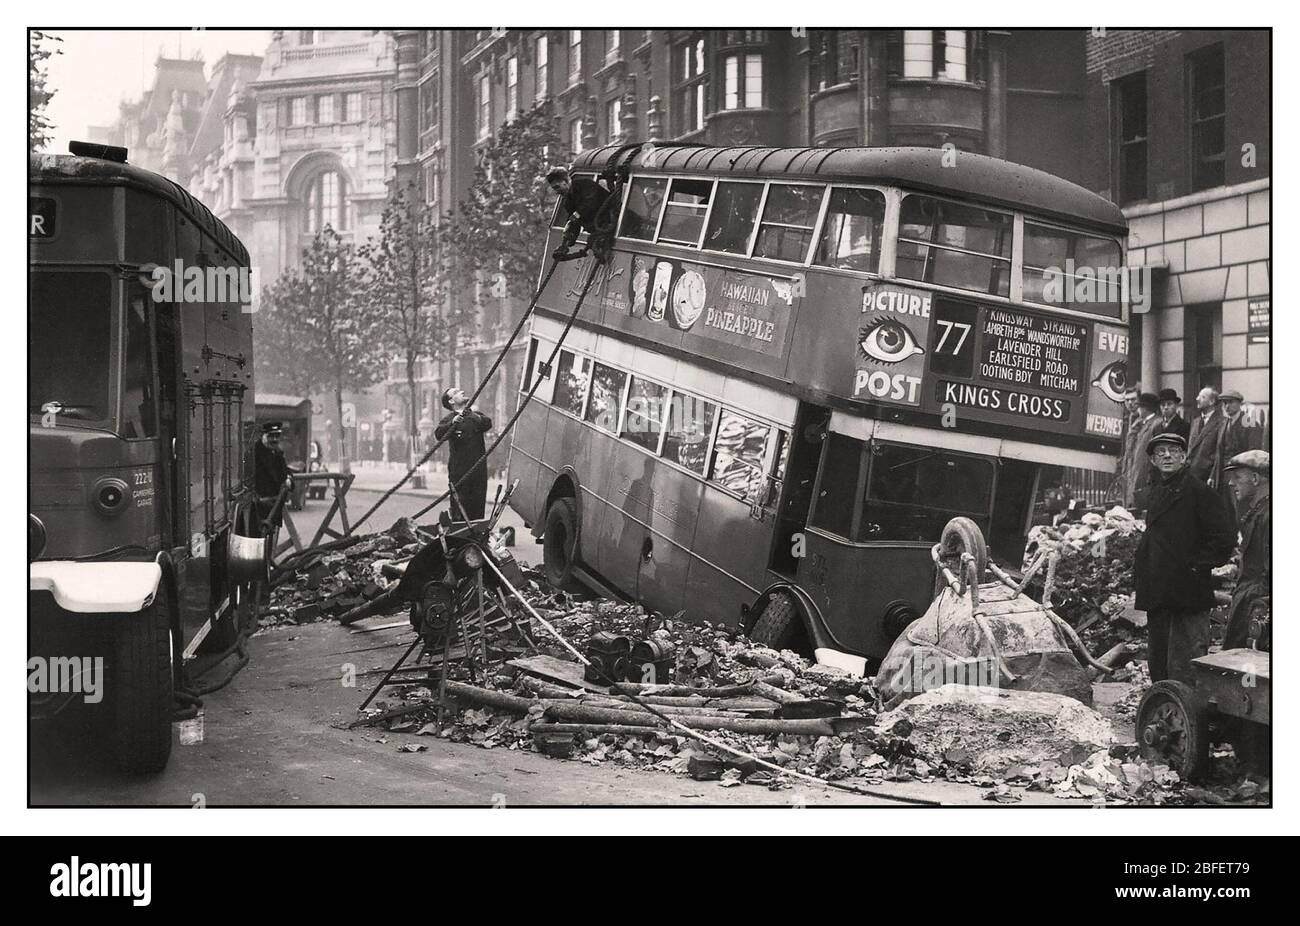 London Blitz 1940s WW2 Archive image of London Bus en-route to Kings Cross in bomb crater caused by terror bombing by the Nazi Germany Luftwaffe airforce Stock Photo